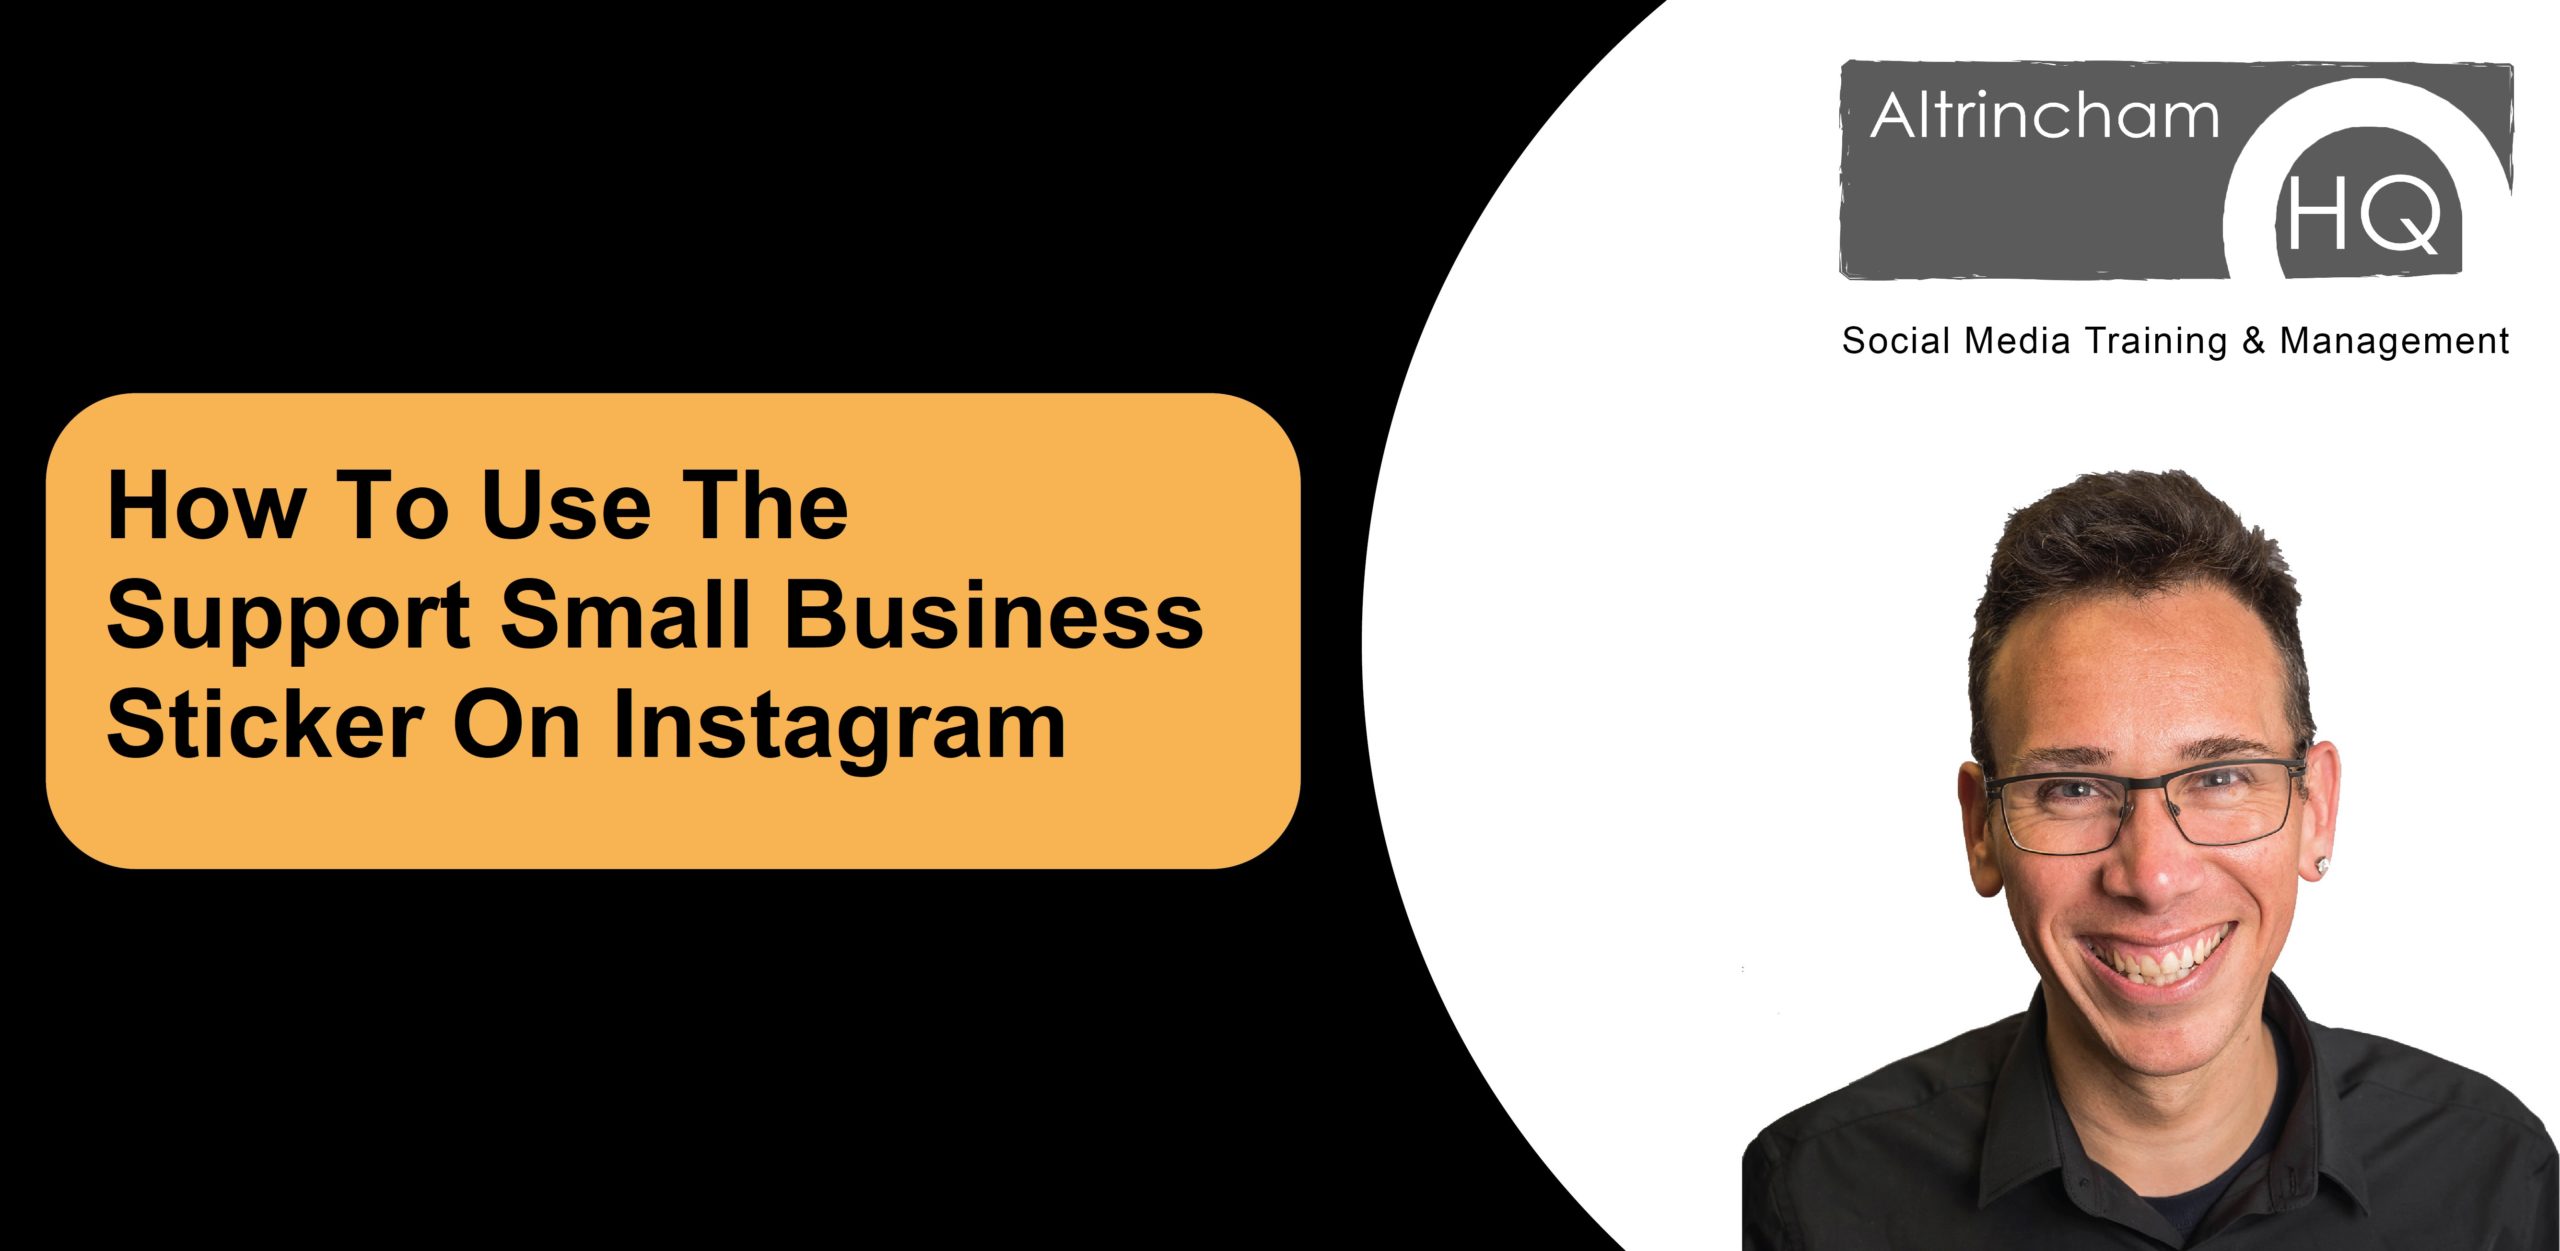 How To Use The Support Small Business Sticker On Instagram